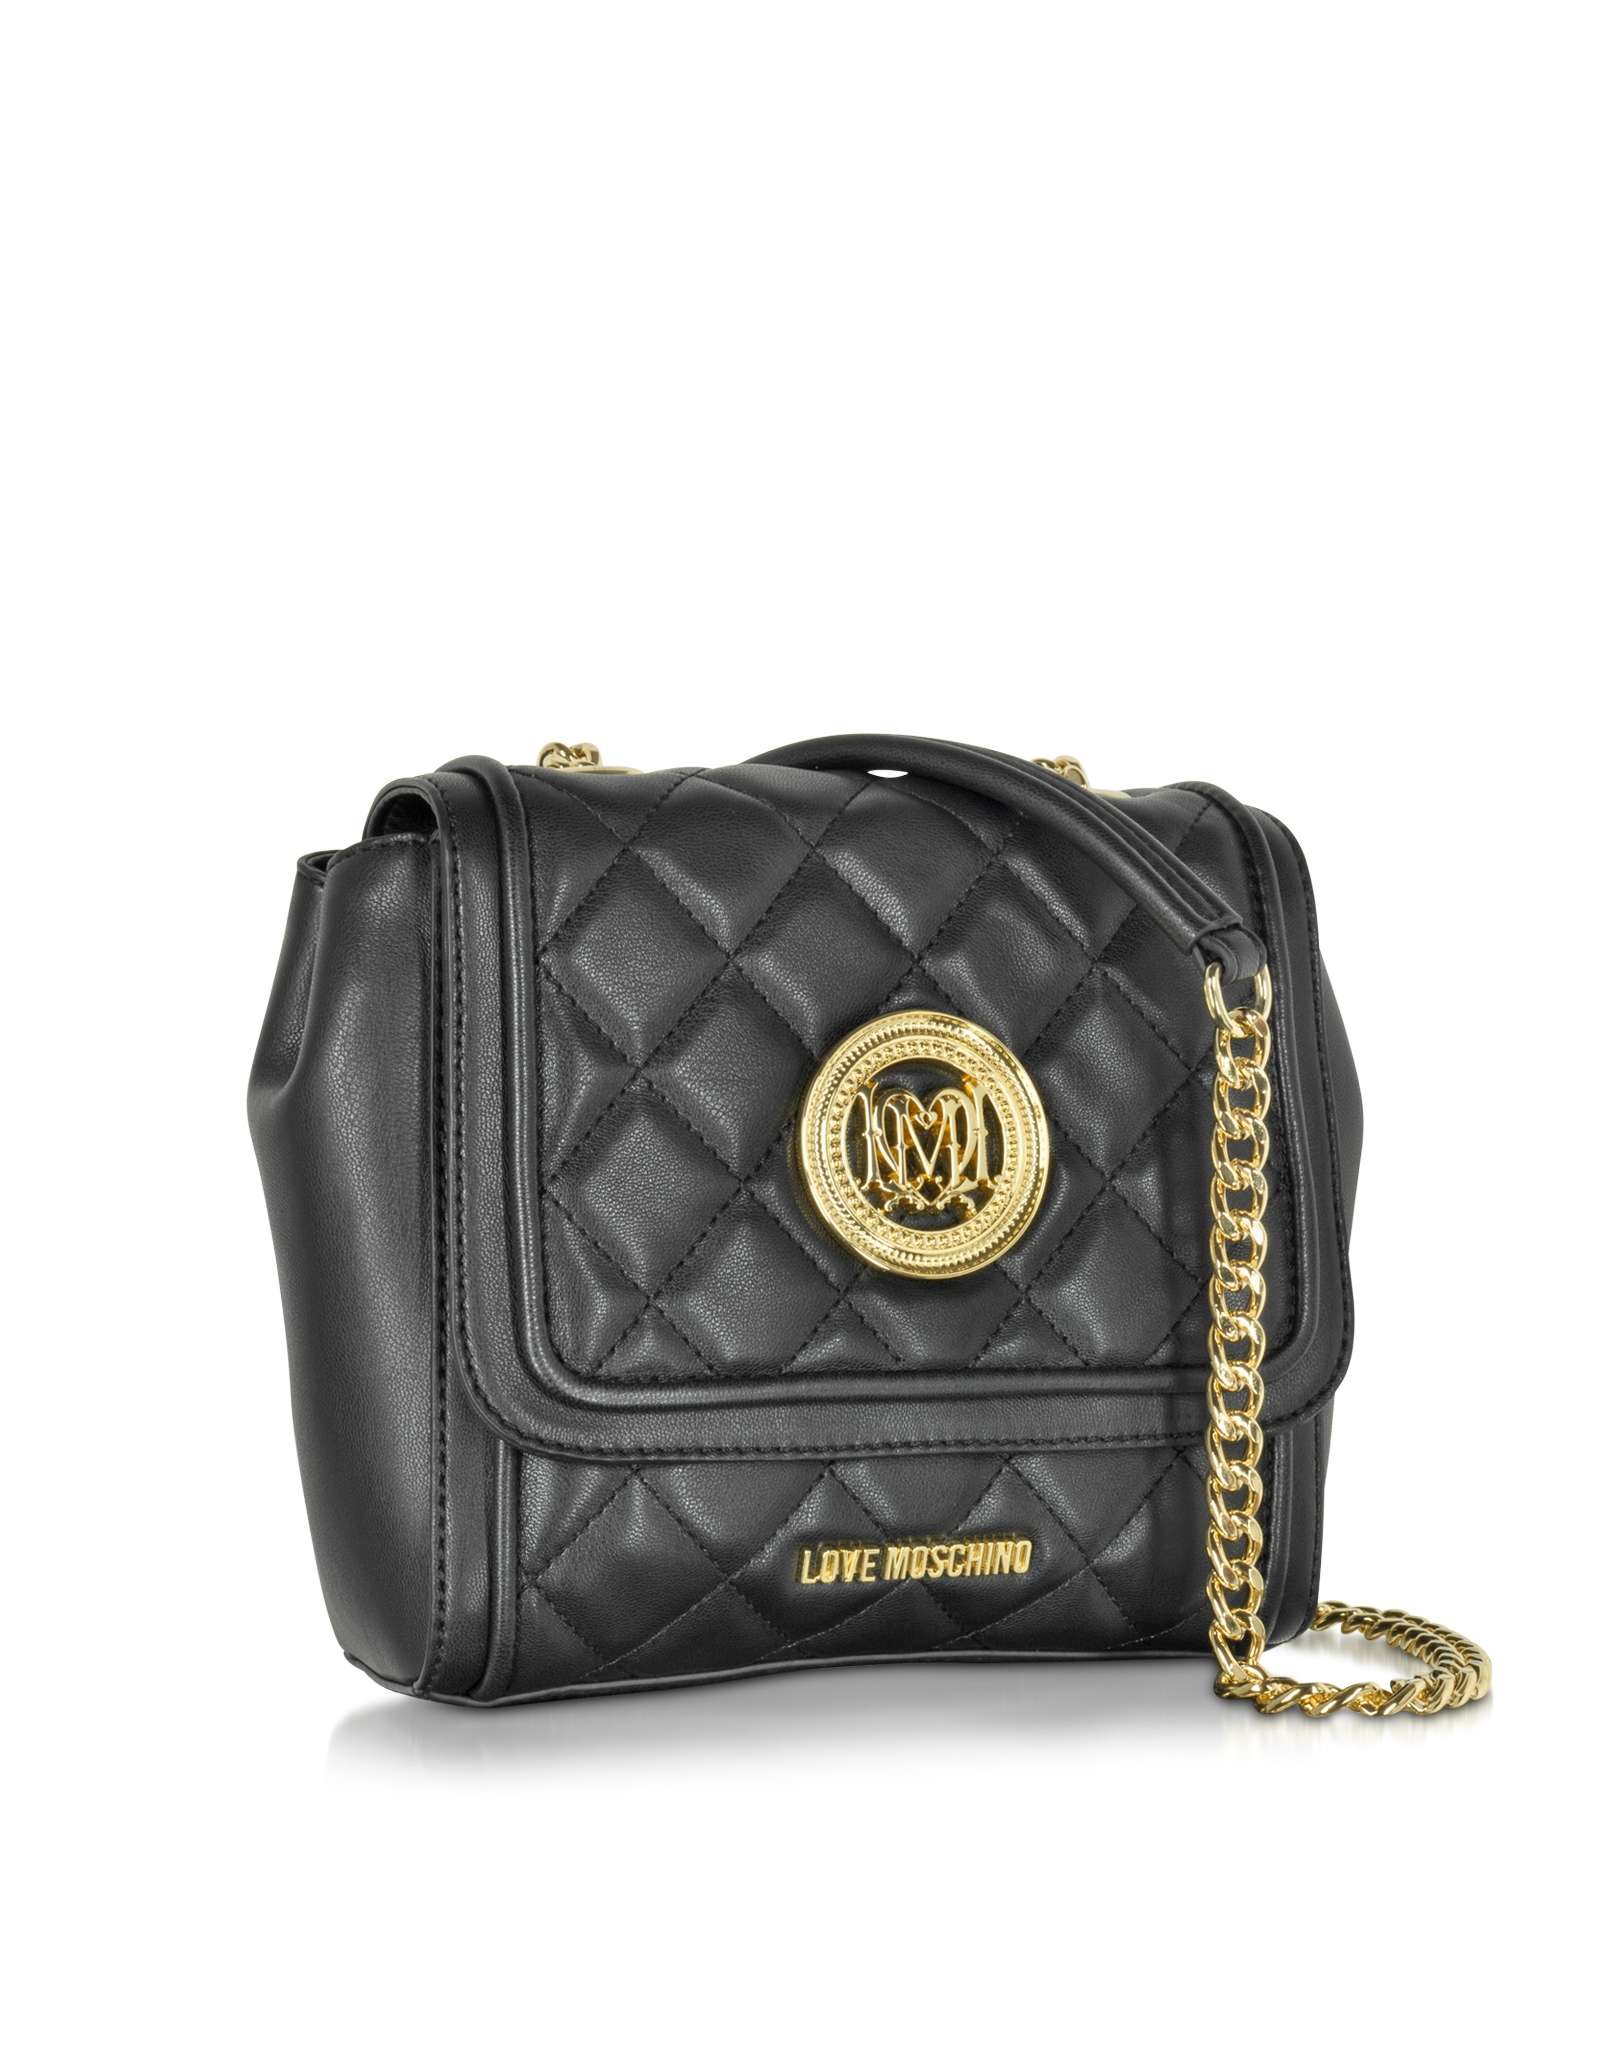 Love Moschino Small Quilted Eco Leather Crossbody Bag in Black - Lyst